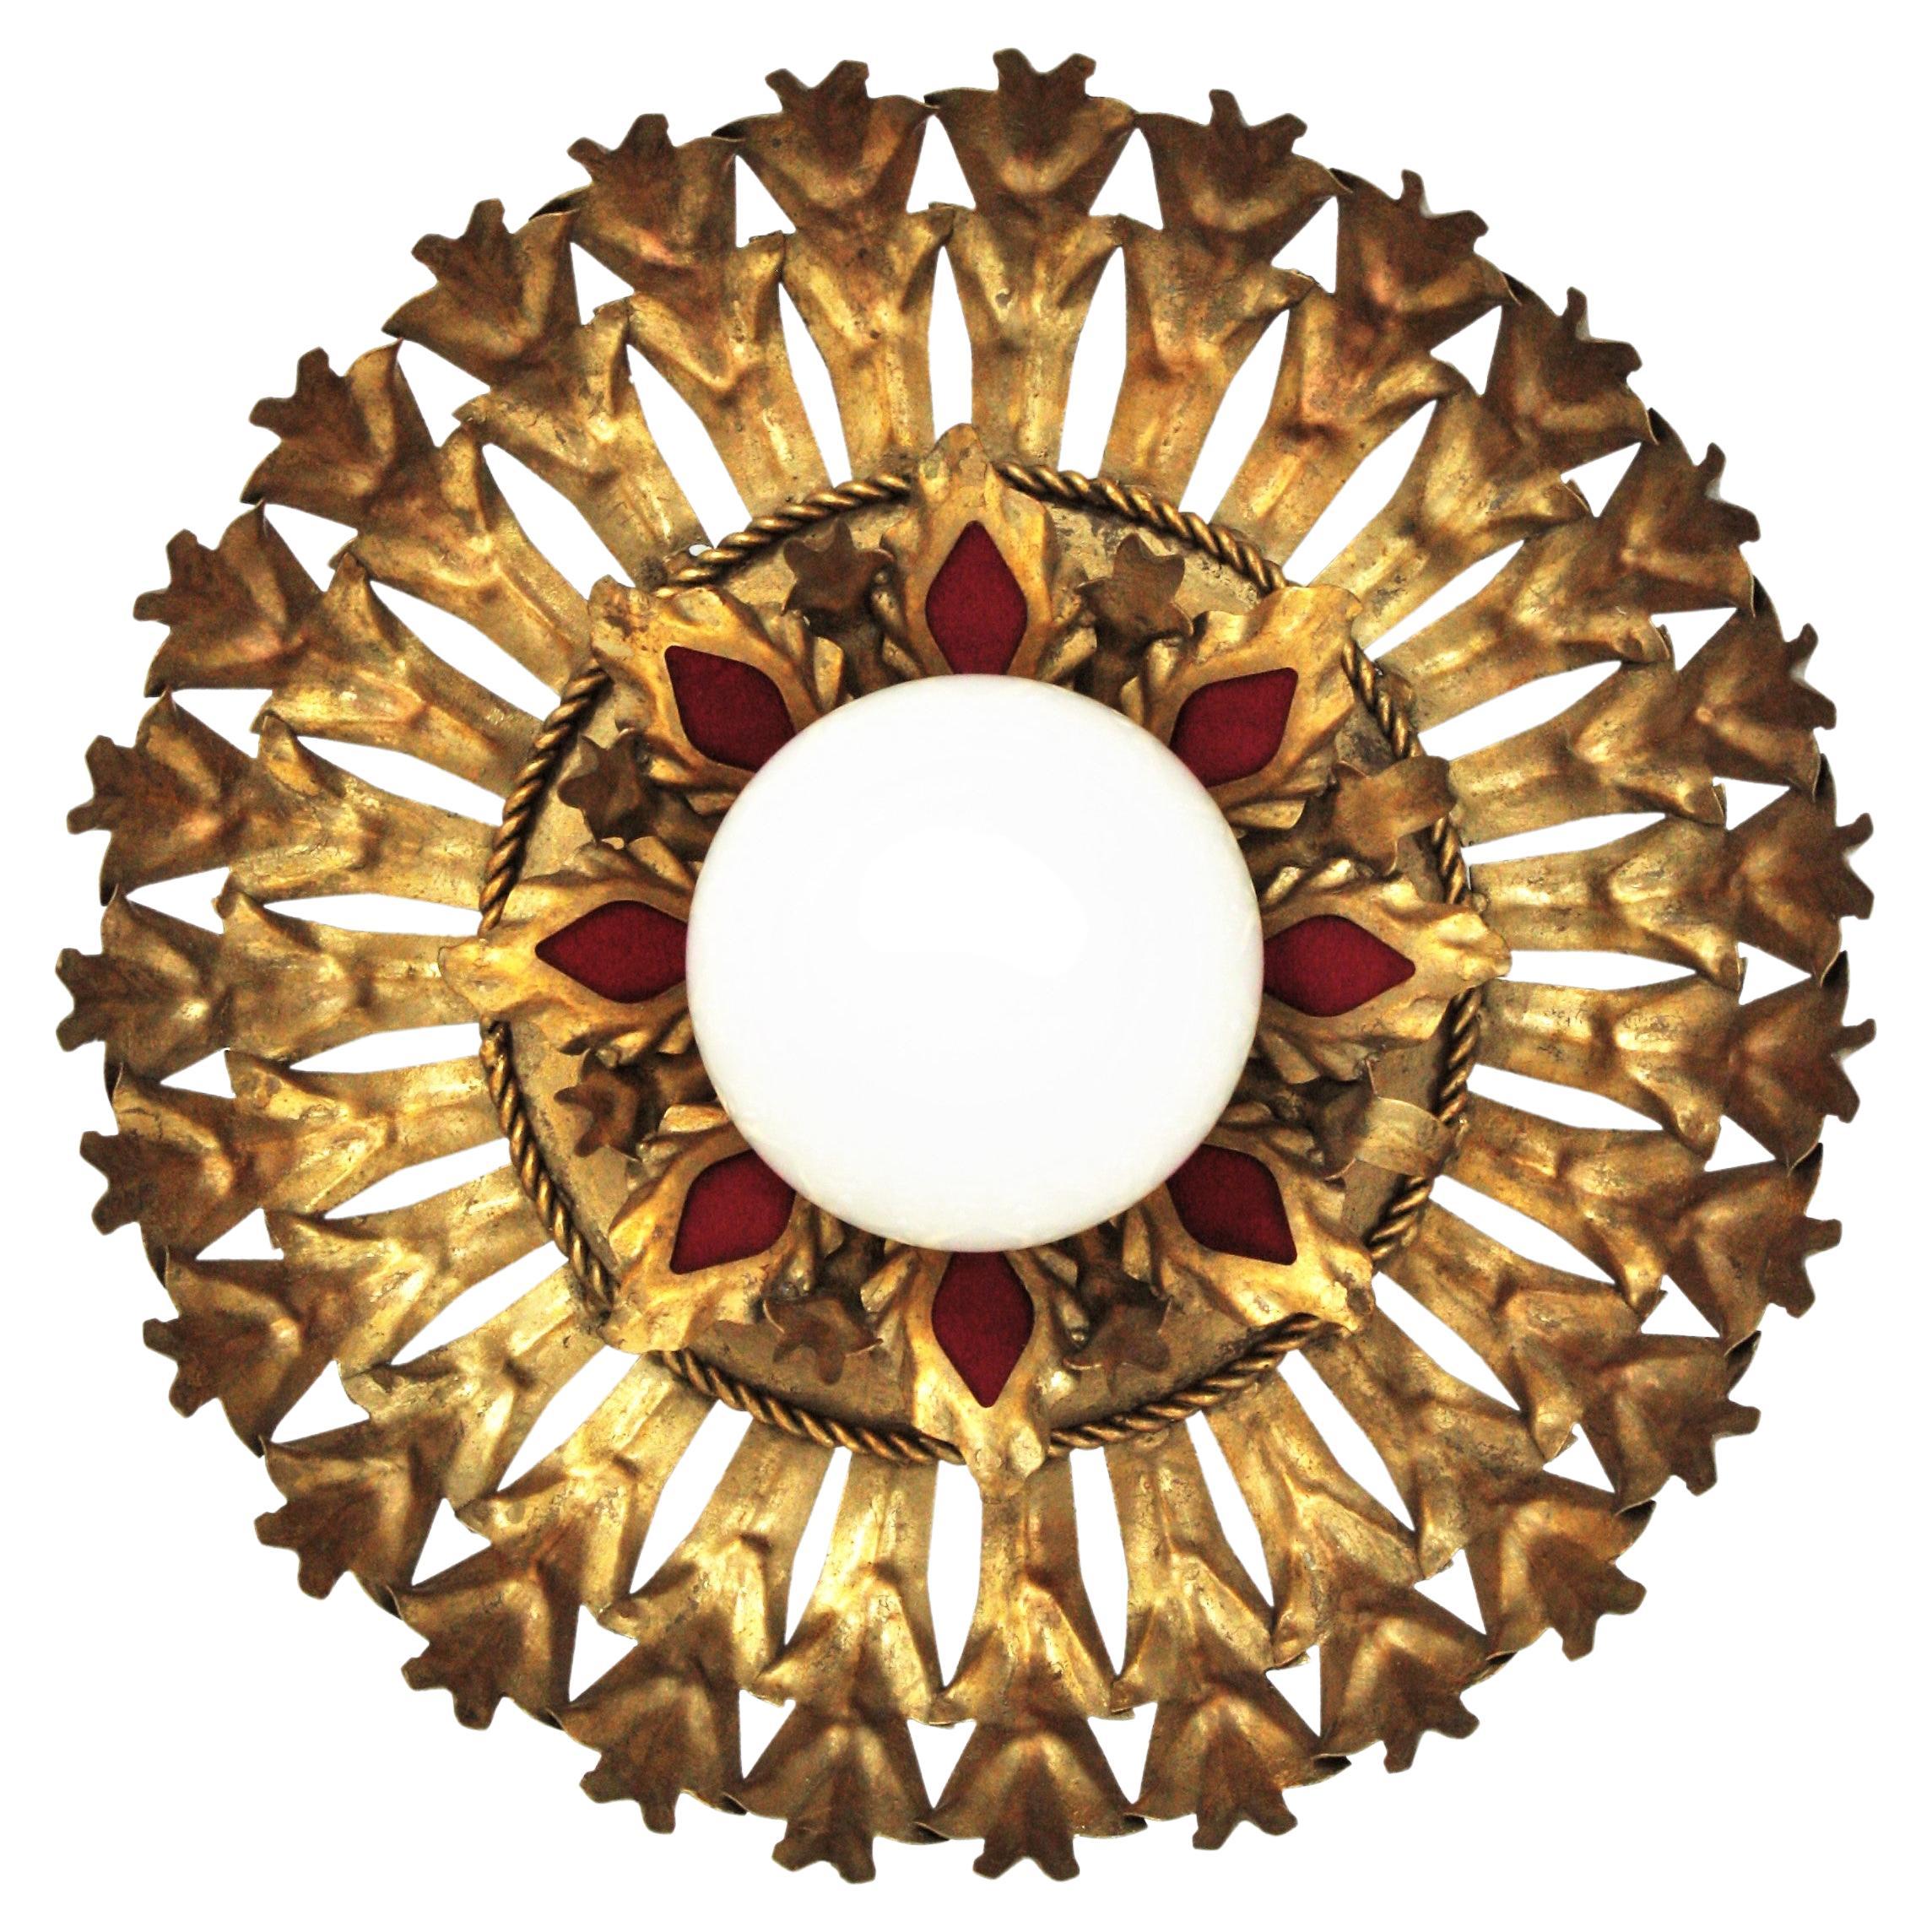 Eye catching sunburst light fixture with foliage design and milk glass globe shade, Spain, 1950s
This ceiling flush mount has two layers of leaves in gilt iron surrounding a central opaline glass globe shaped shade. It has decorative details in red